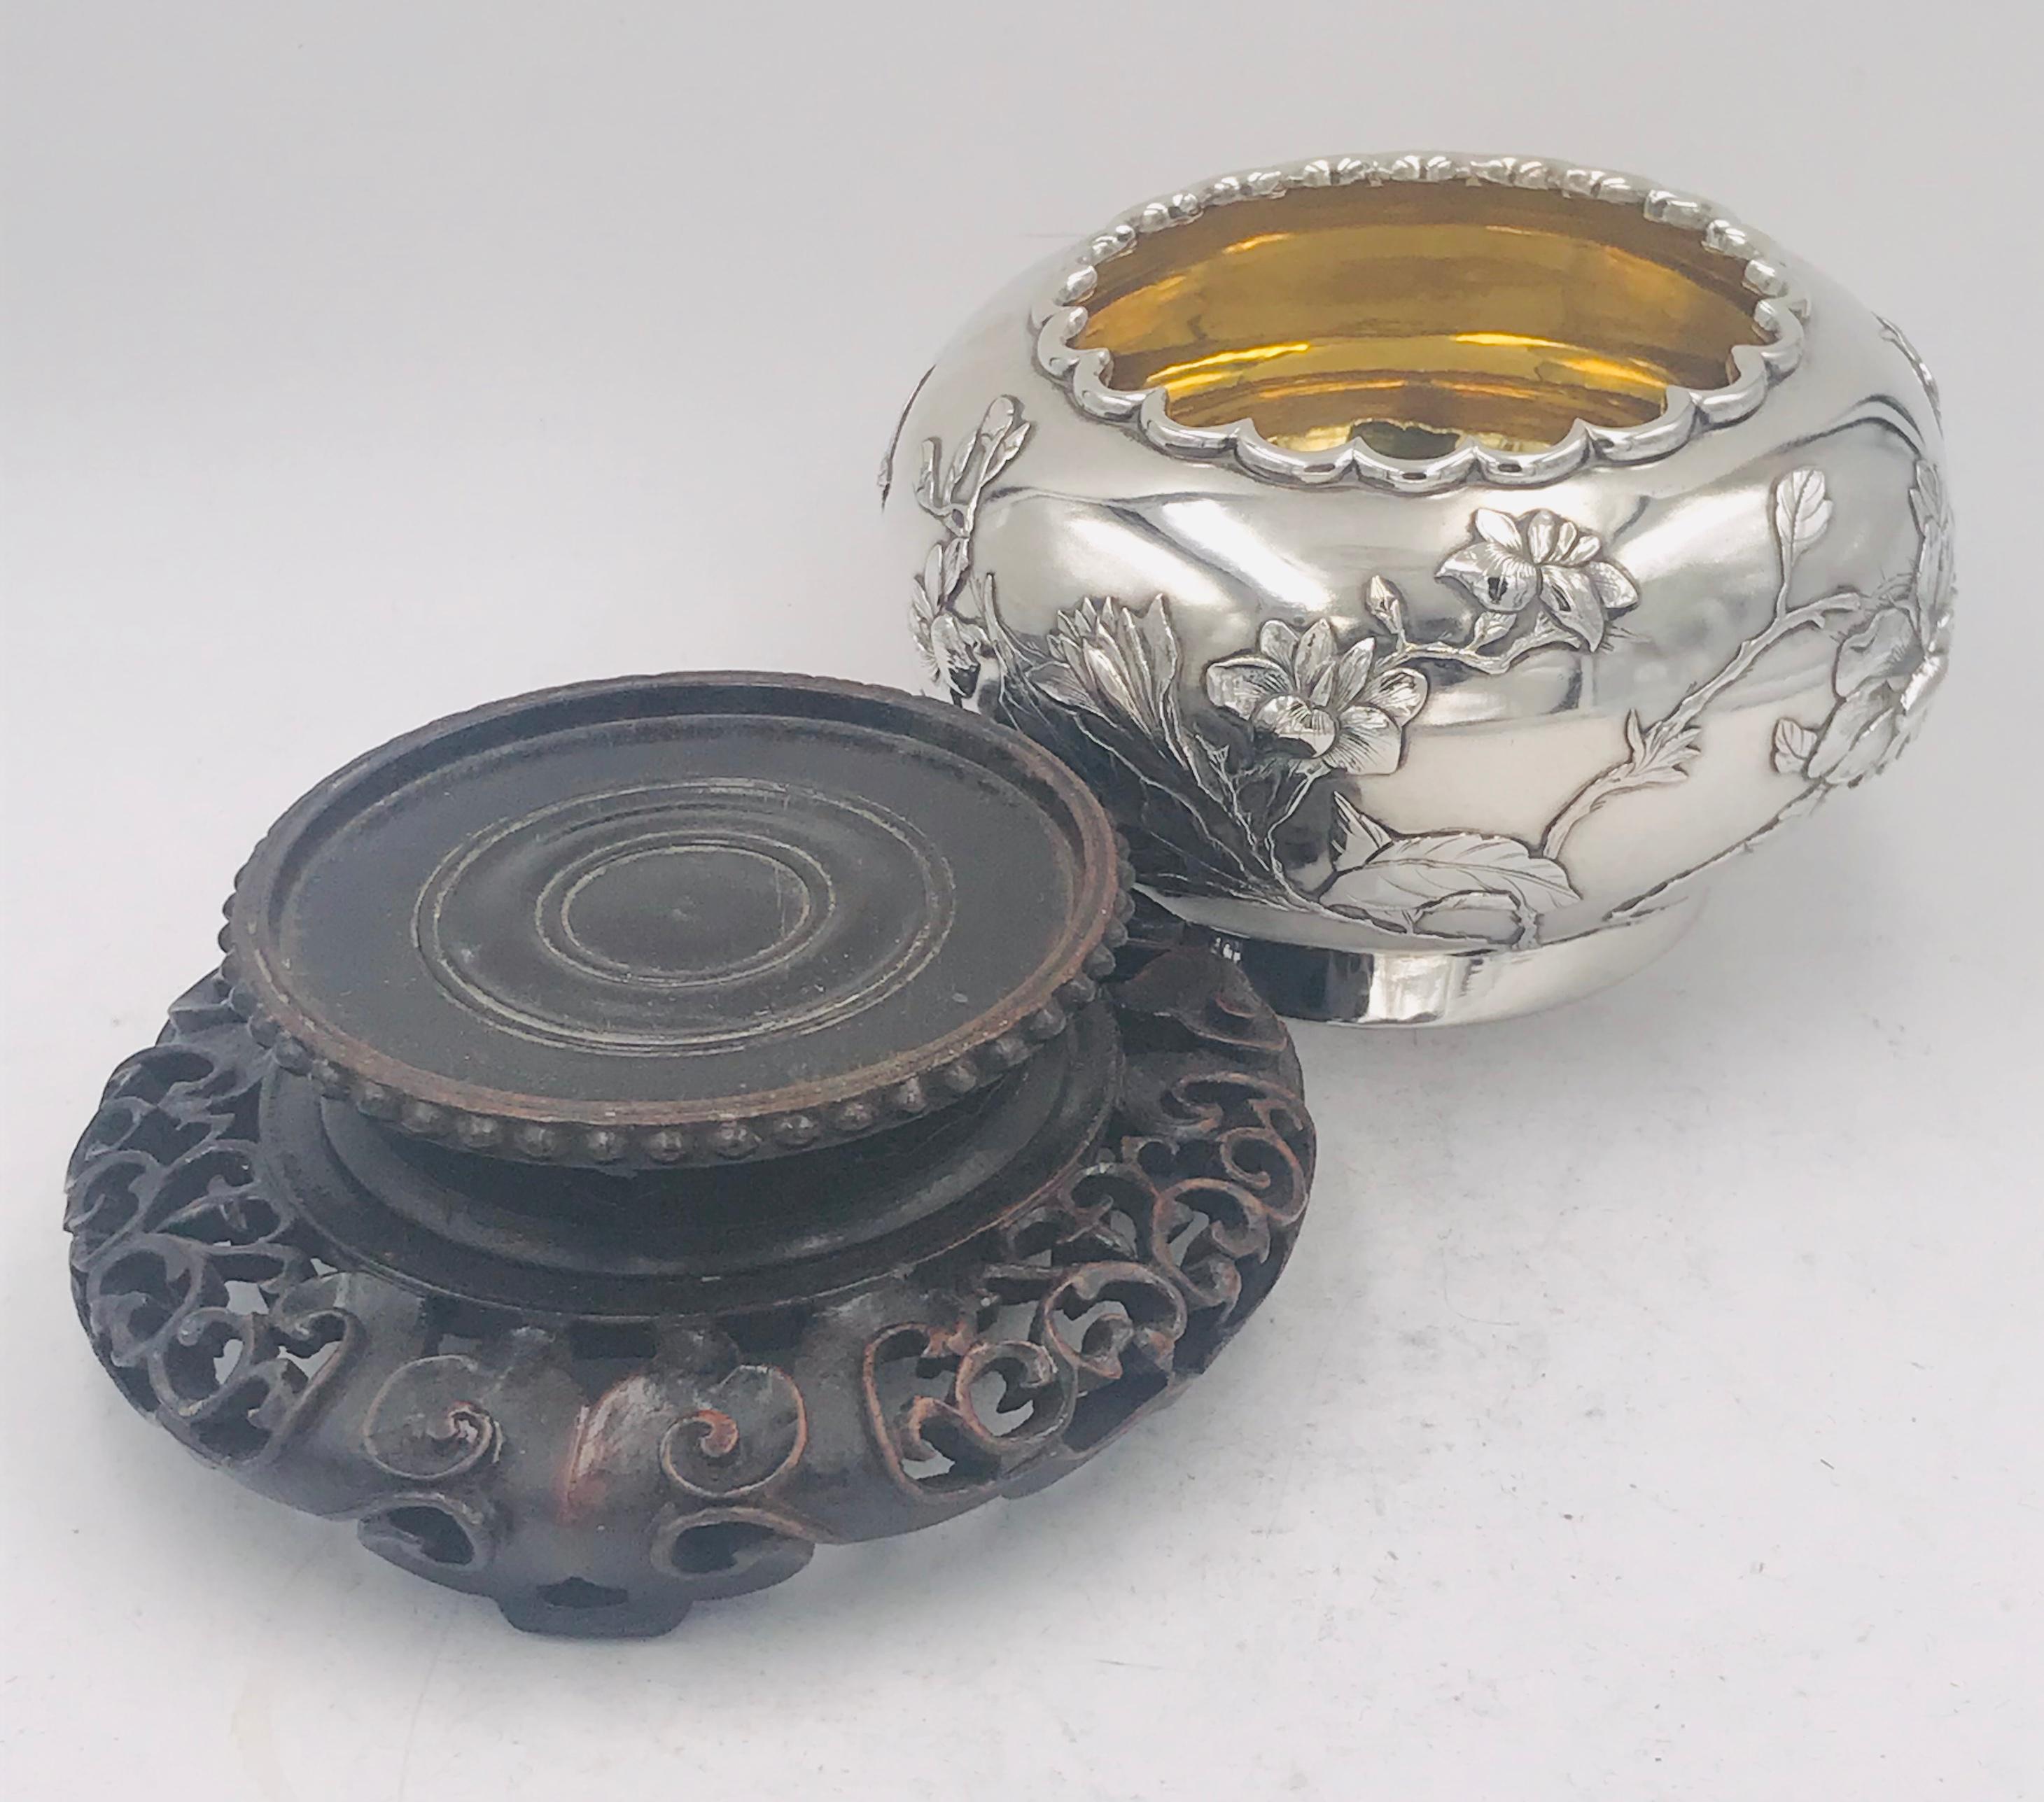 Chinese Silver Export Silver Bowl 1